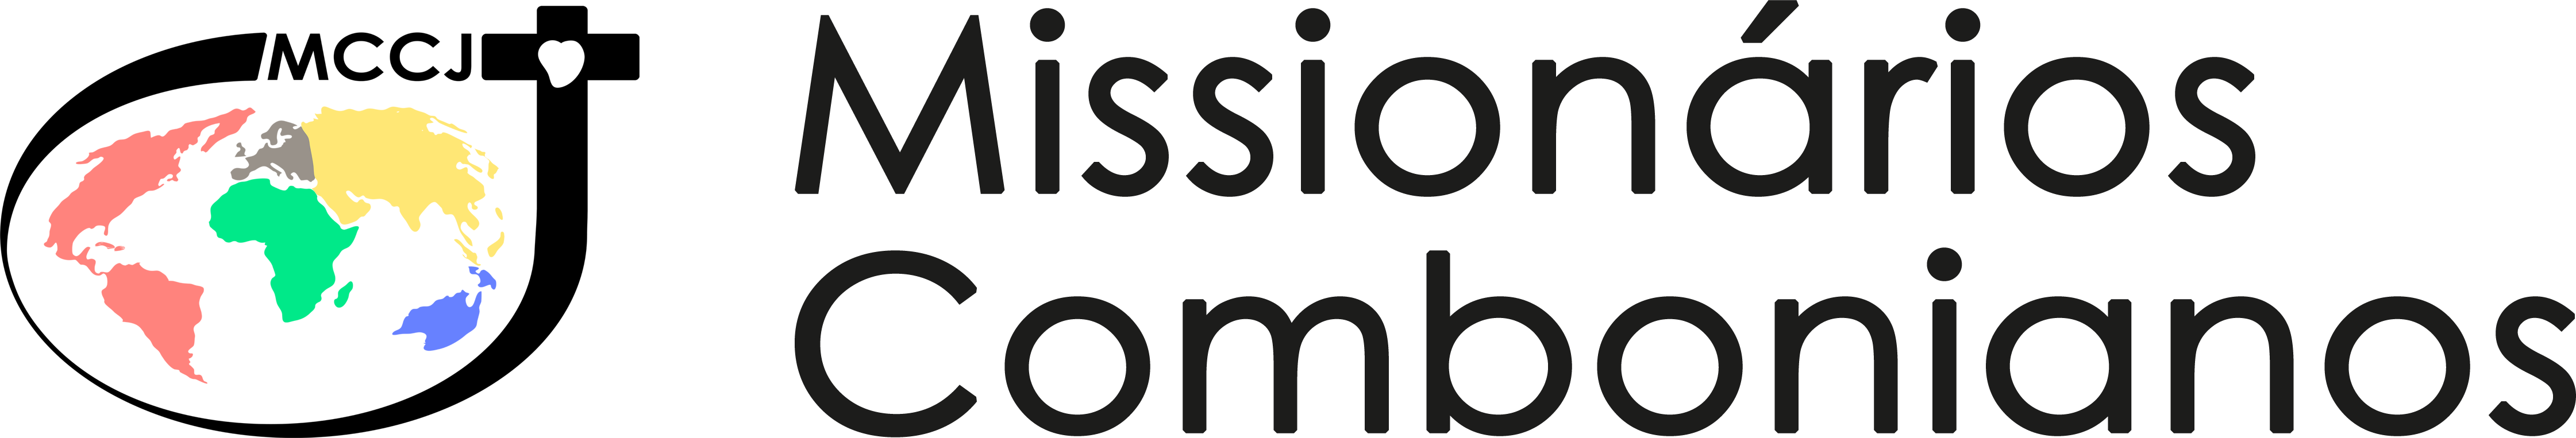 logo-combonianos-color.png